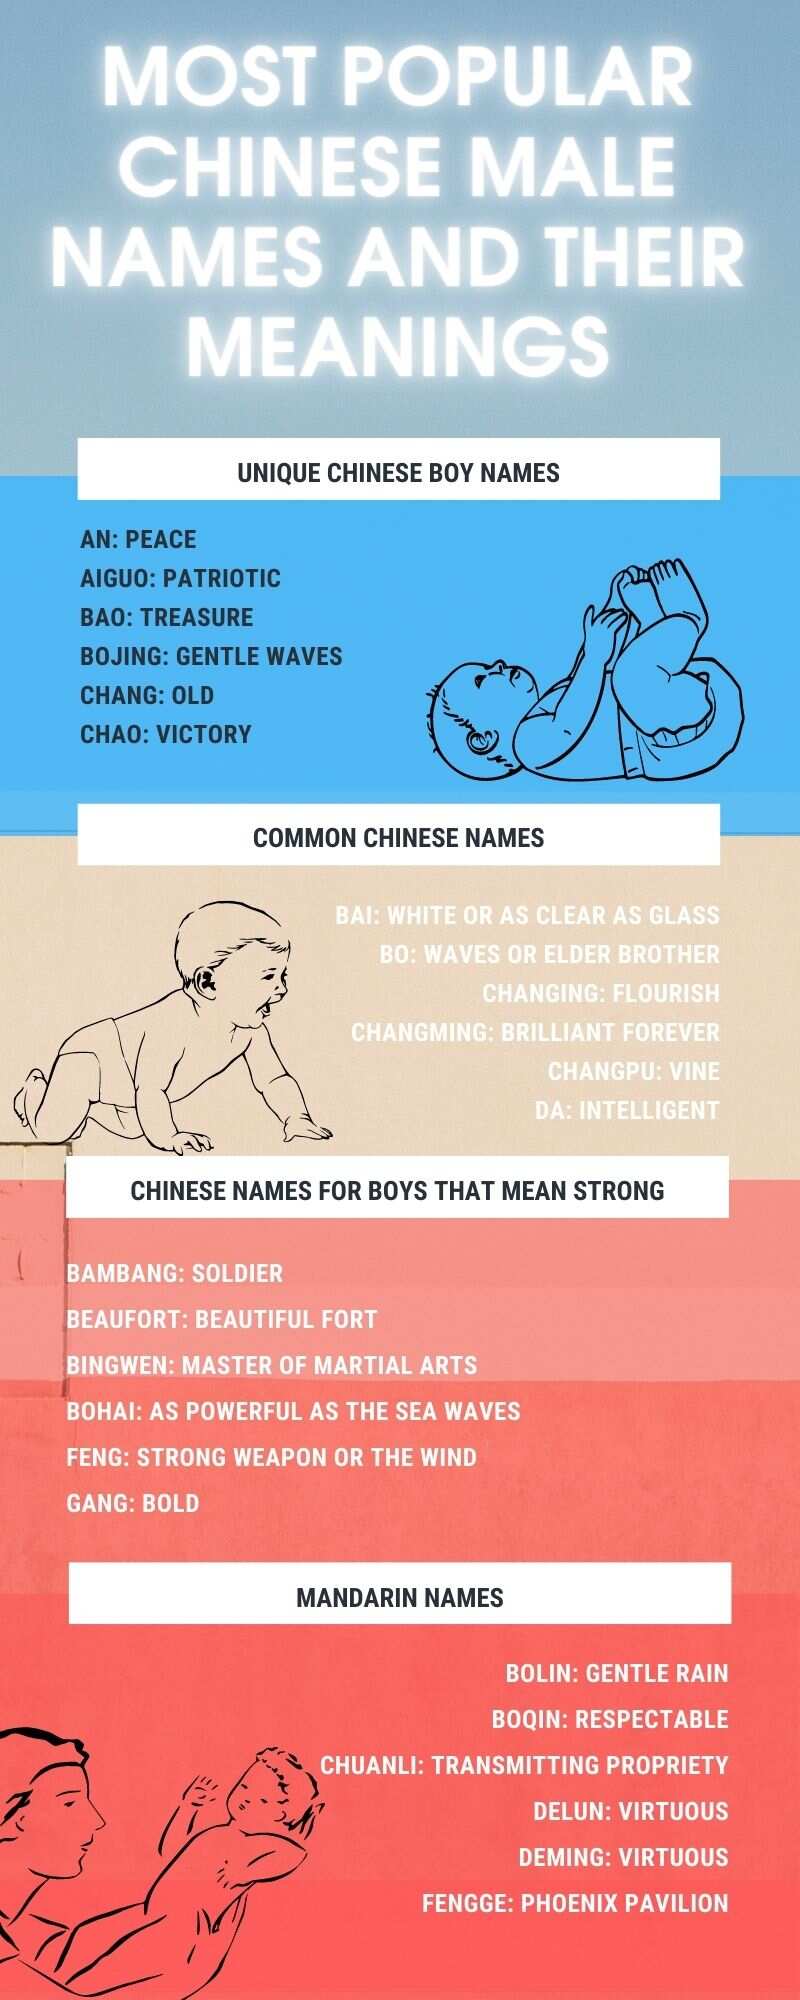 most popular Chinese male names